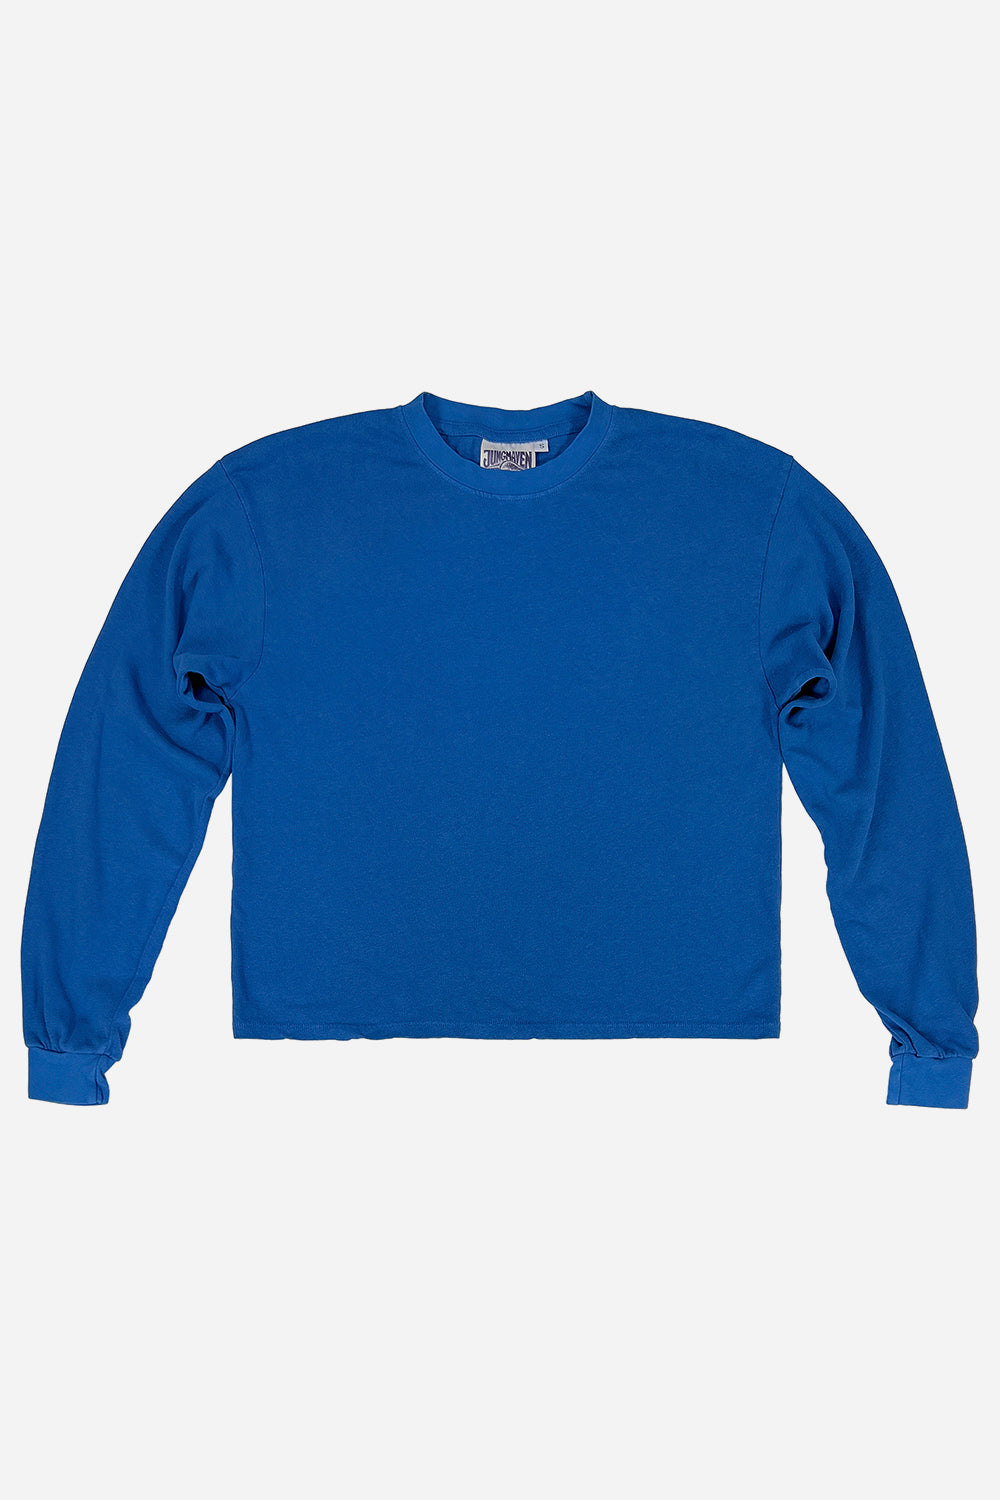 Cropped Long Sleeve Tee | Jungmaven Hemp Clothing & Accessories / Color: Galaxy Blue